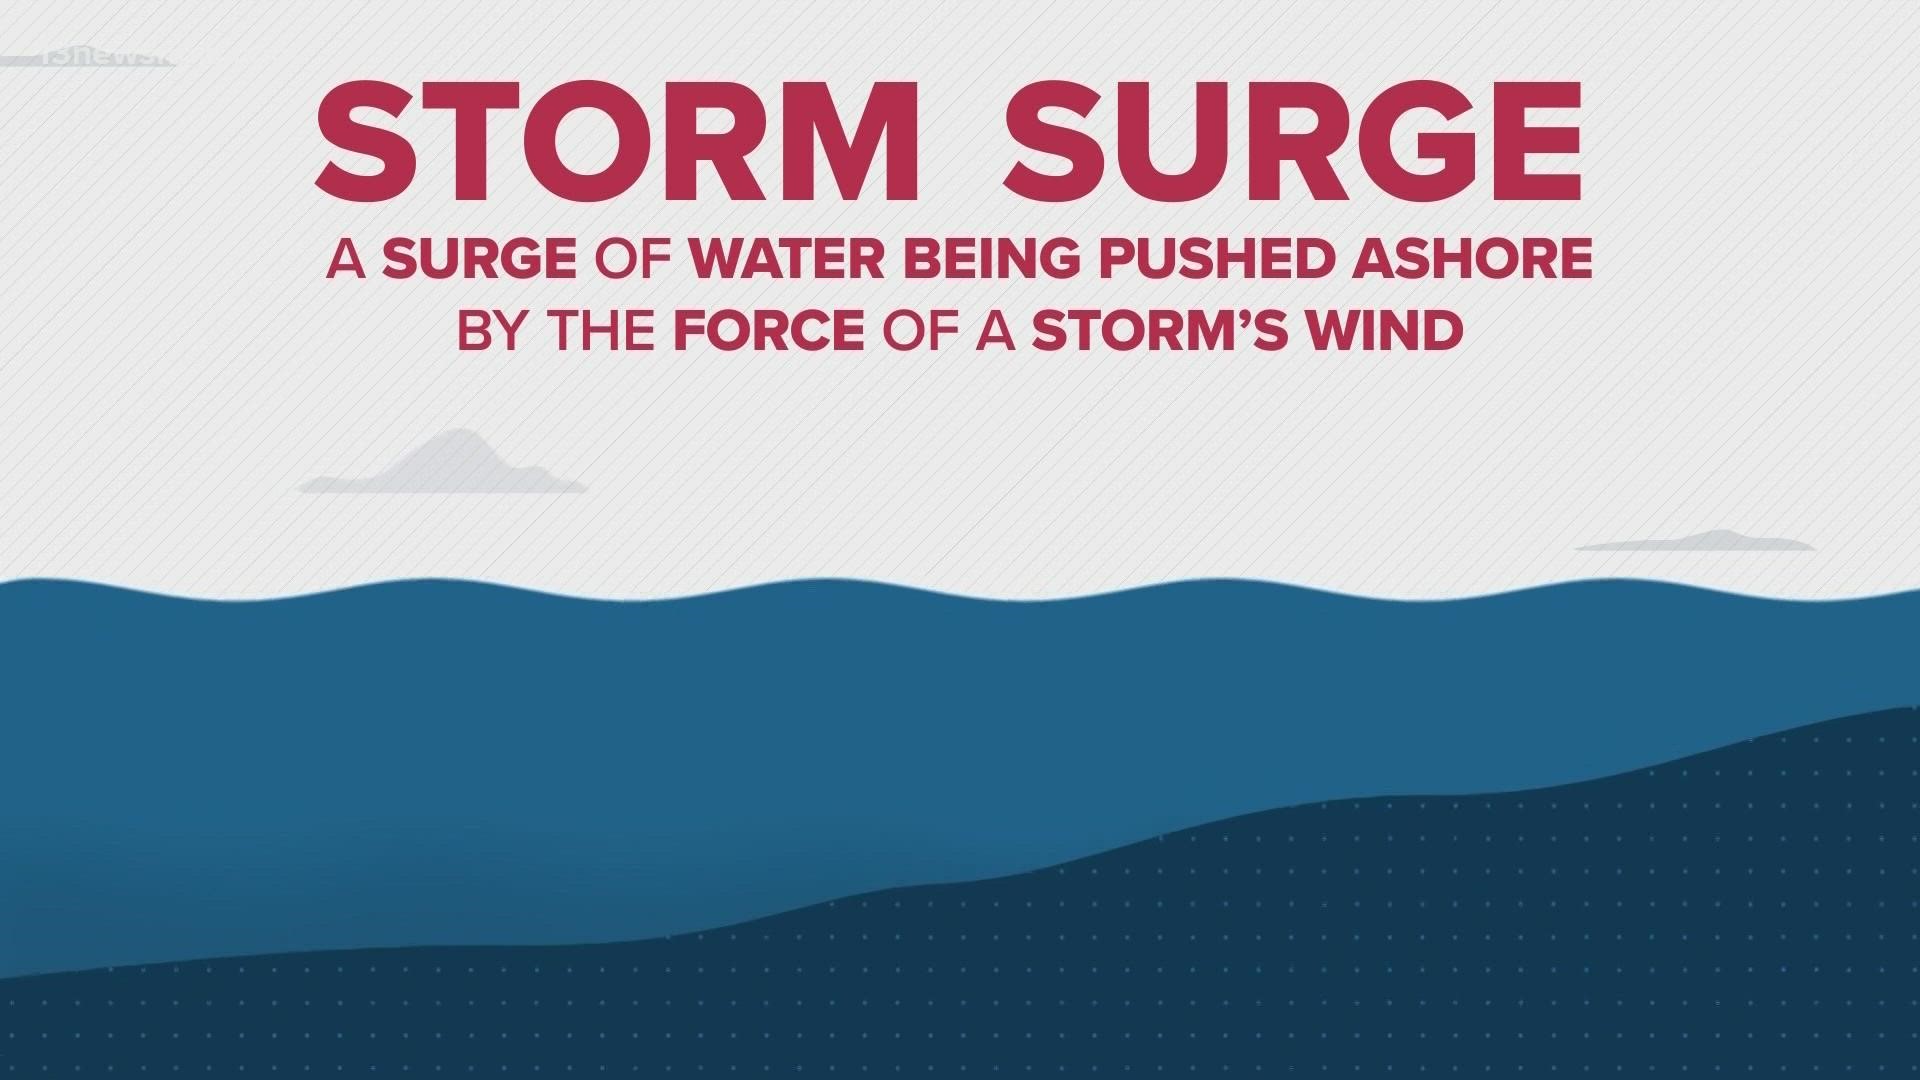 In this hurricane fast facts, Craig Moeller discusses why storm surges are so dangerous.